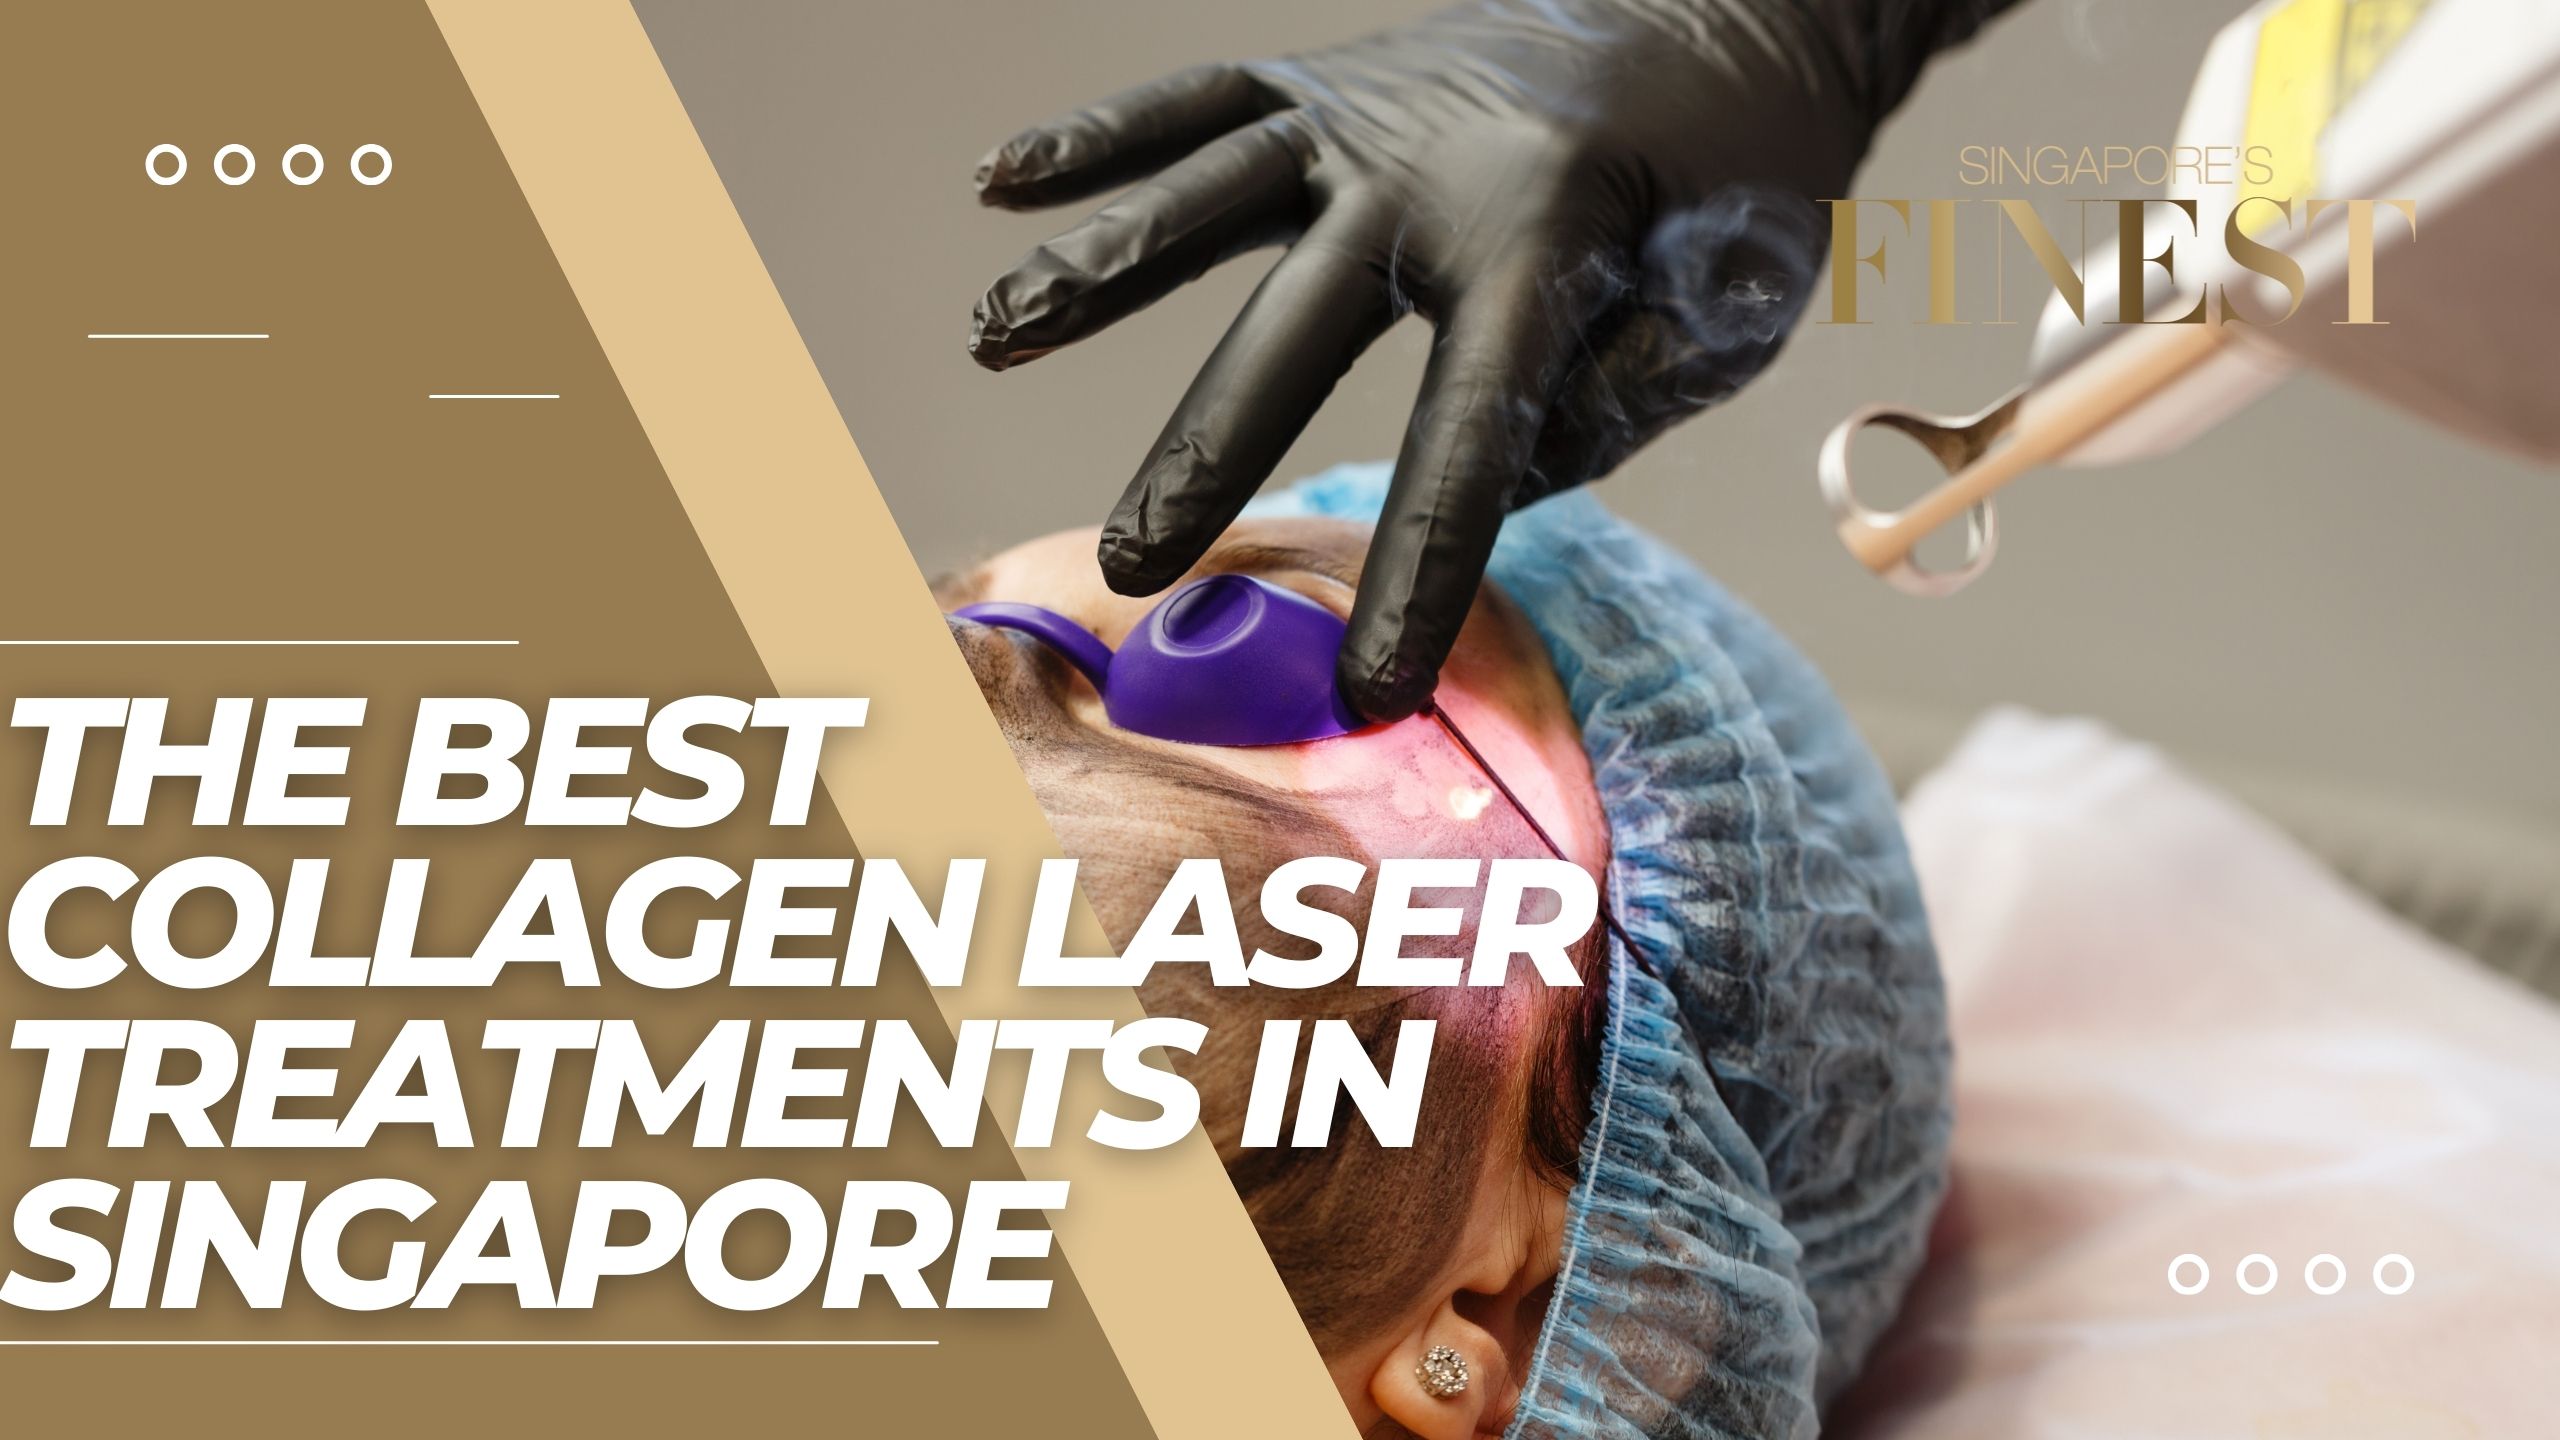 The Finest Collagen Laser Treatments in Singapore